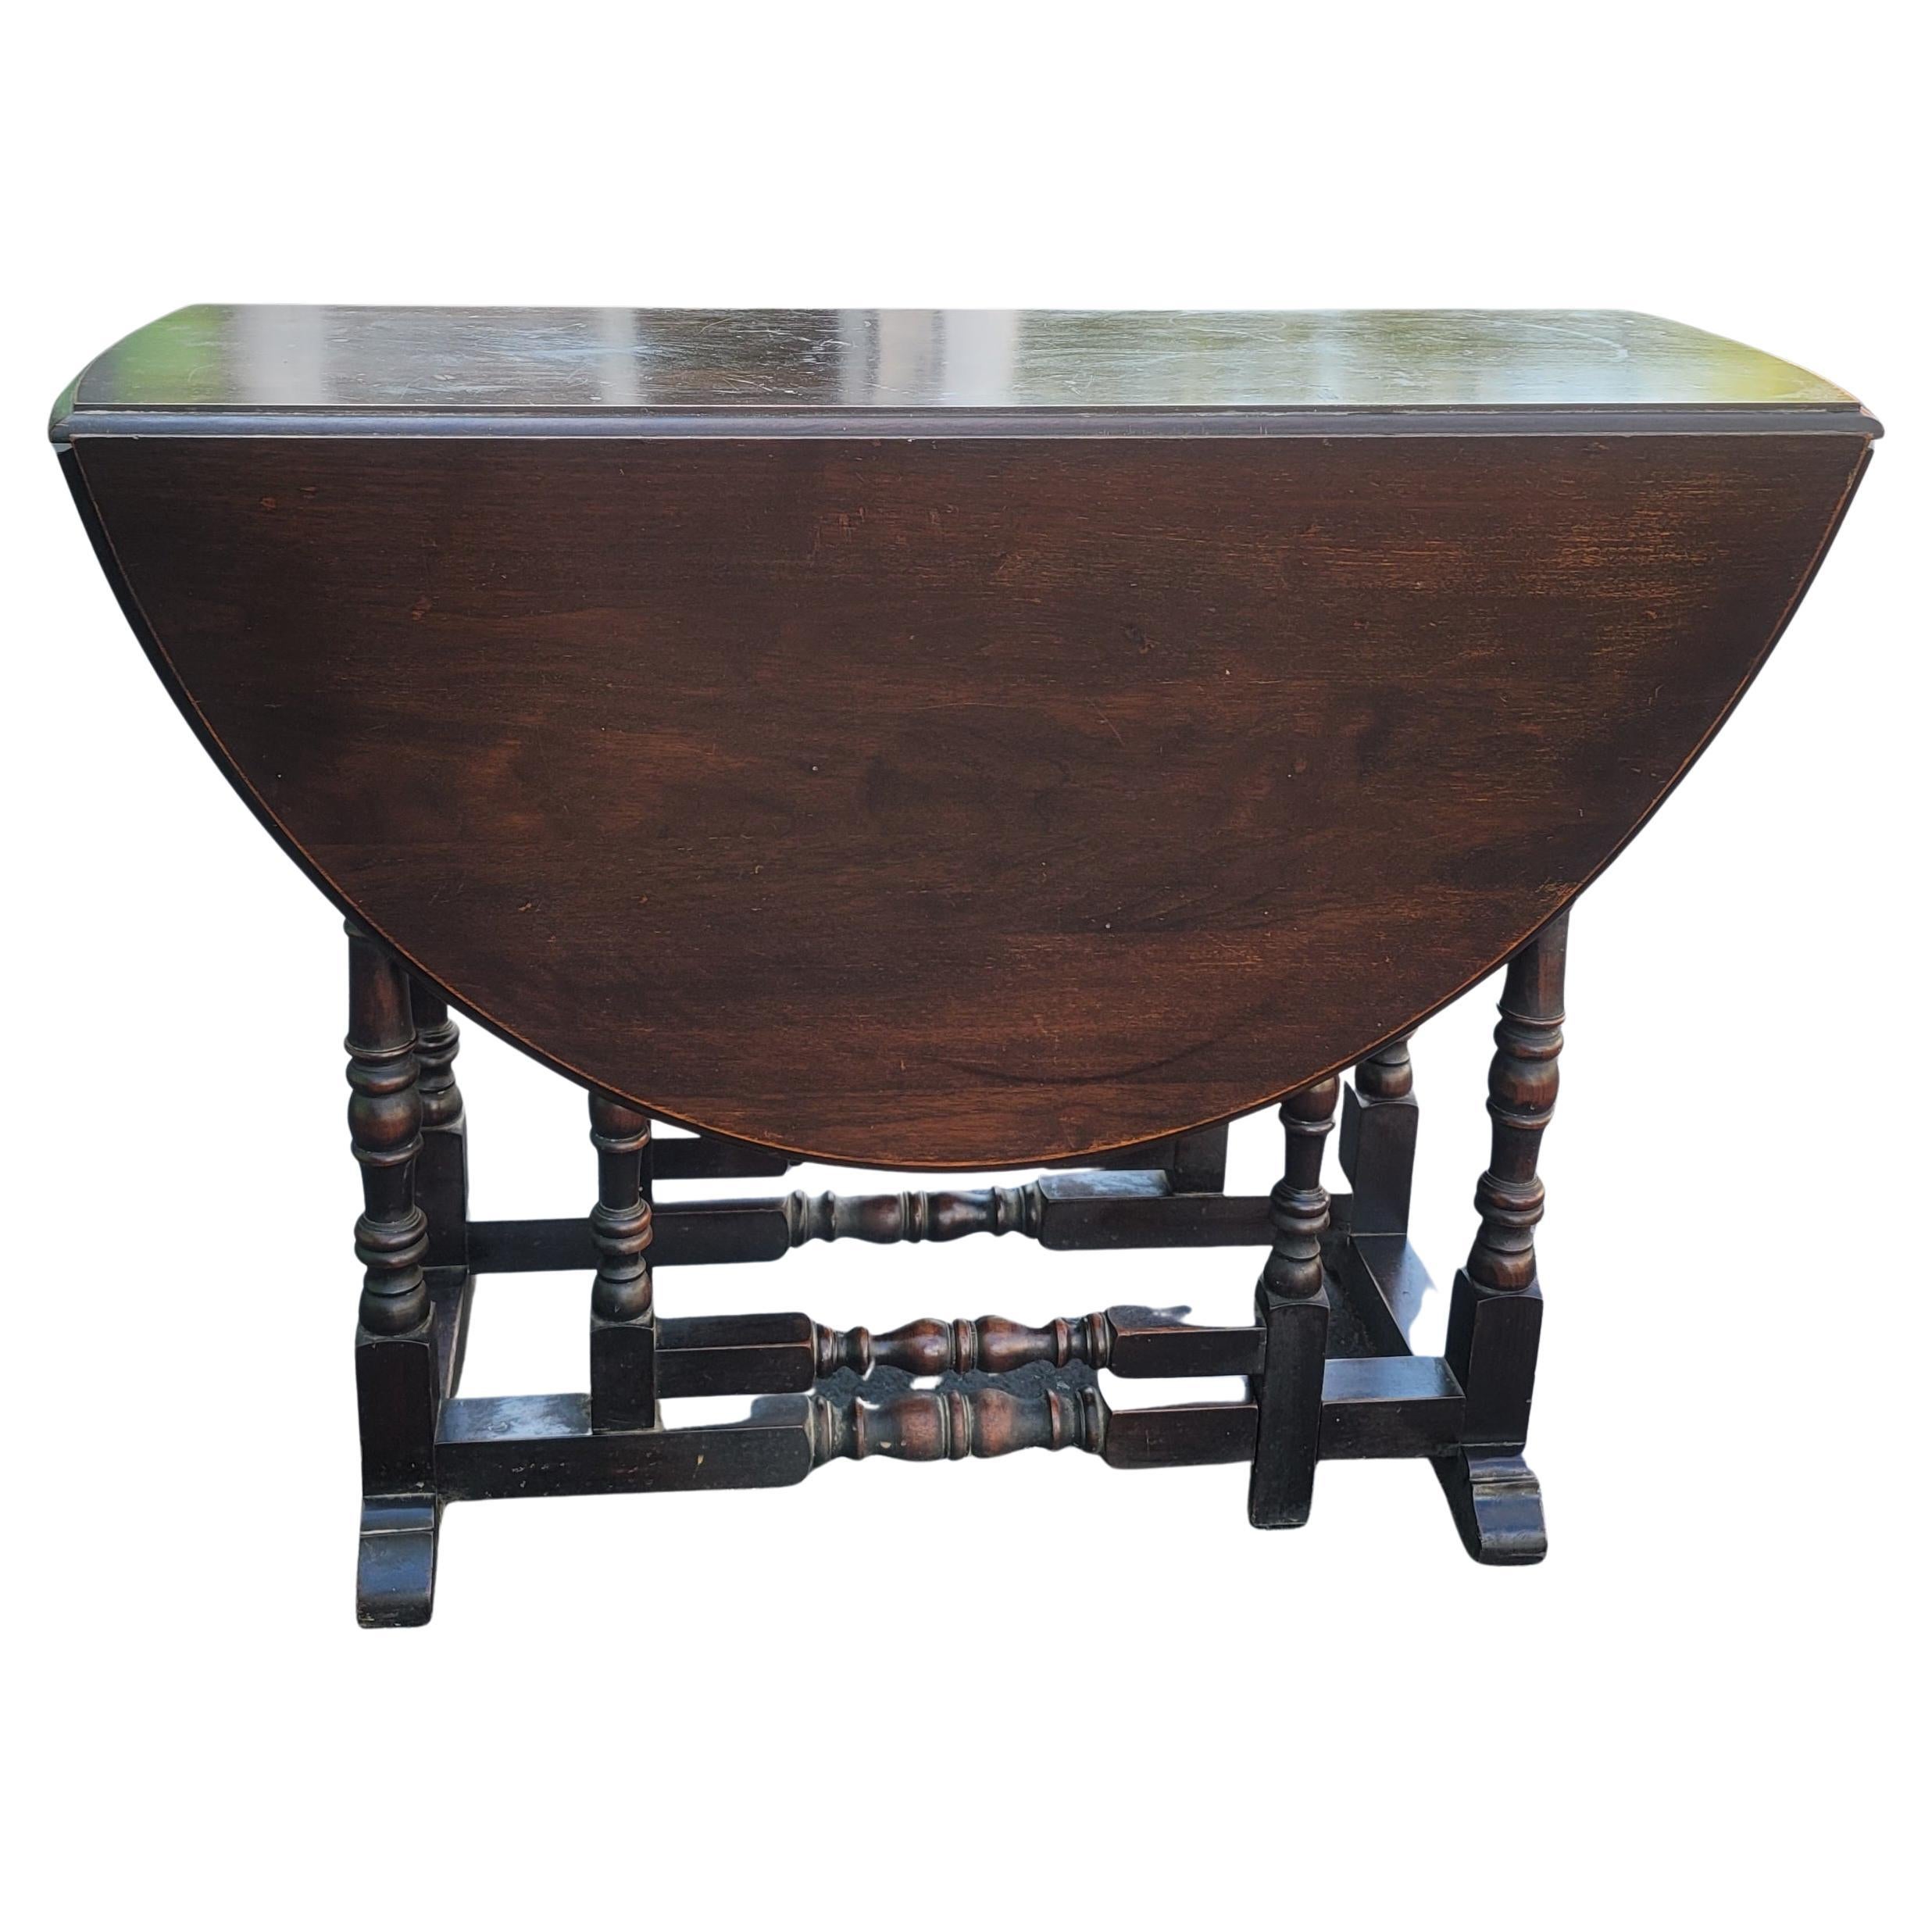 Antique Walnut Gatelegs Oval Table, Circa 1910s For Sale 3